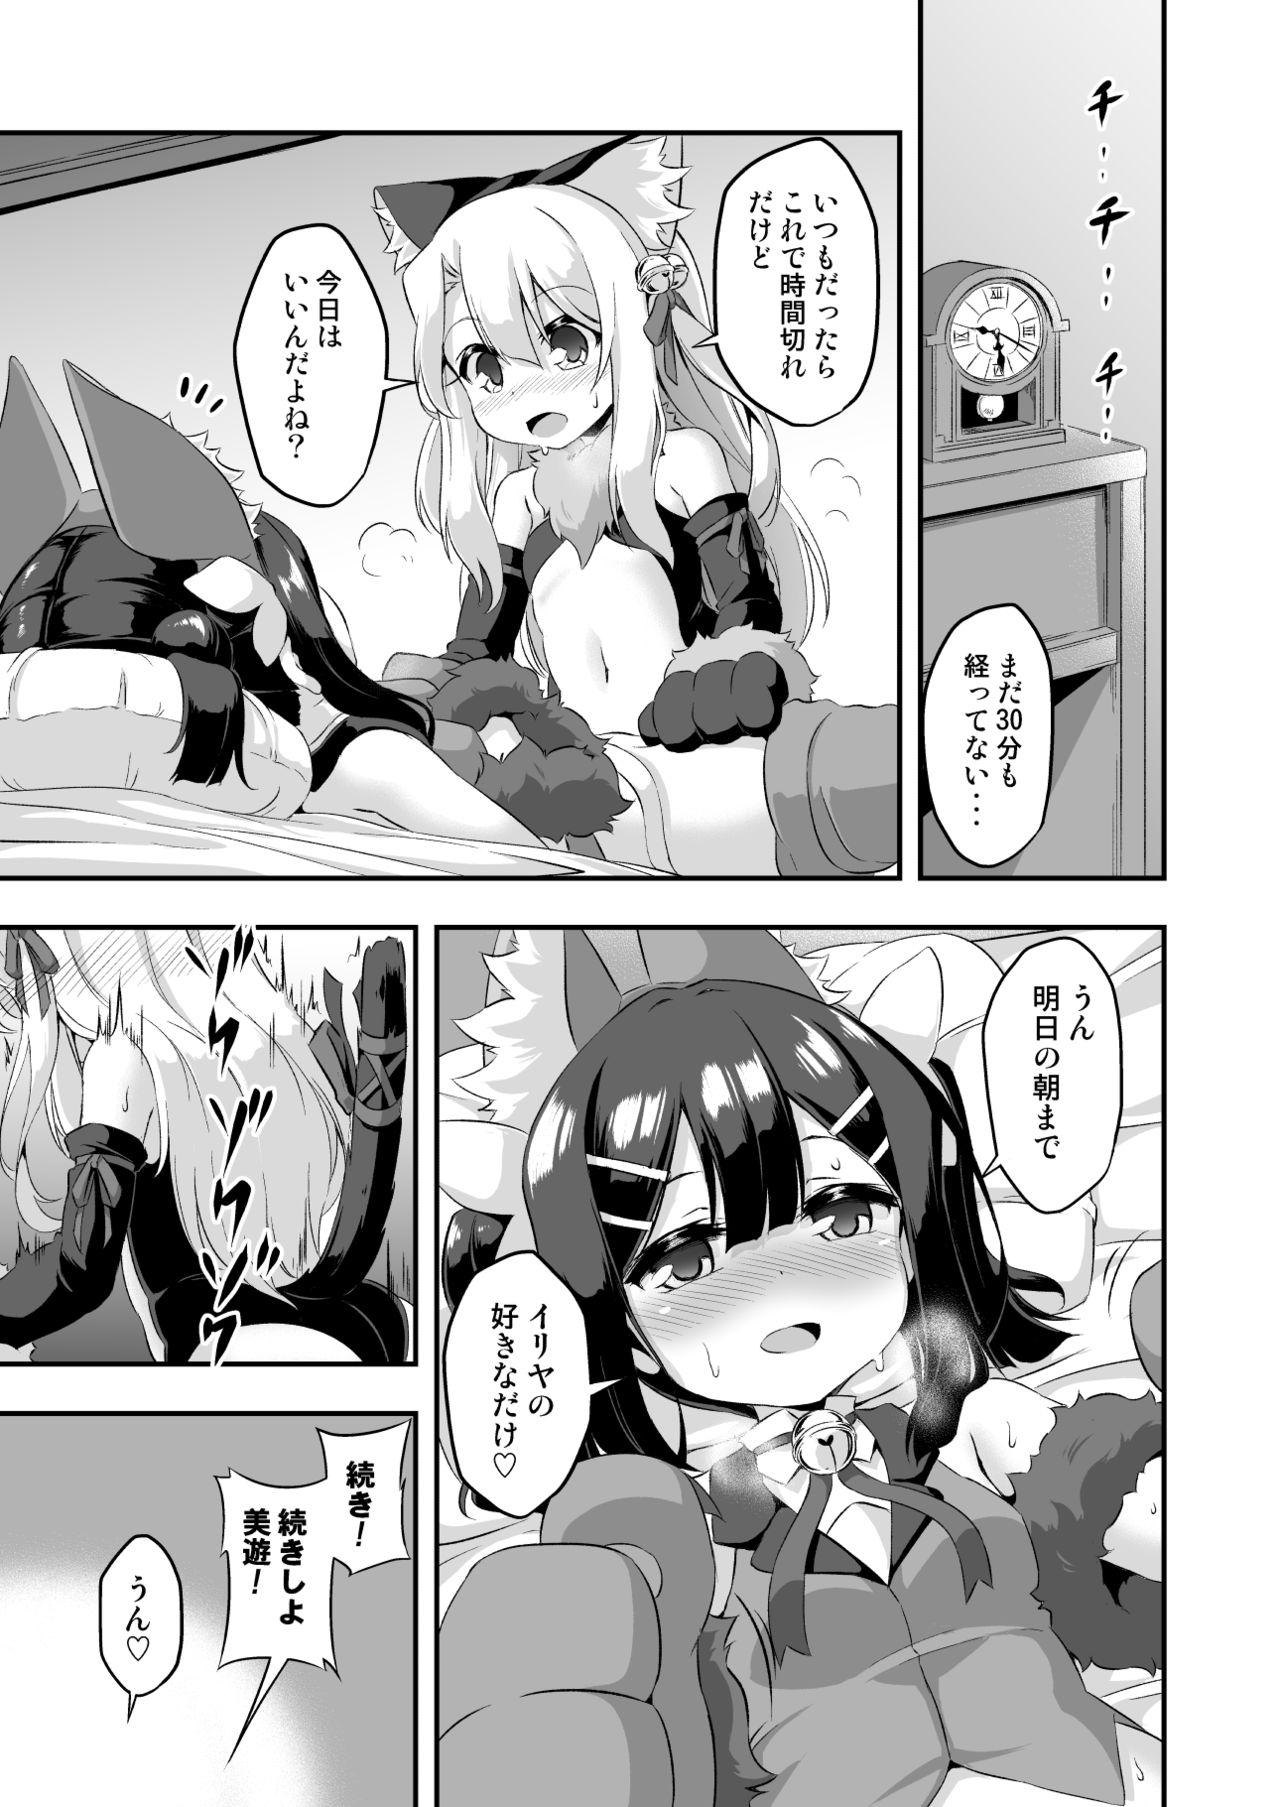 Pounded Loli & Futa Vol. 6 - Fate kaleid liner prisma illya Hot Pussy - Page 10